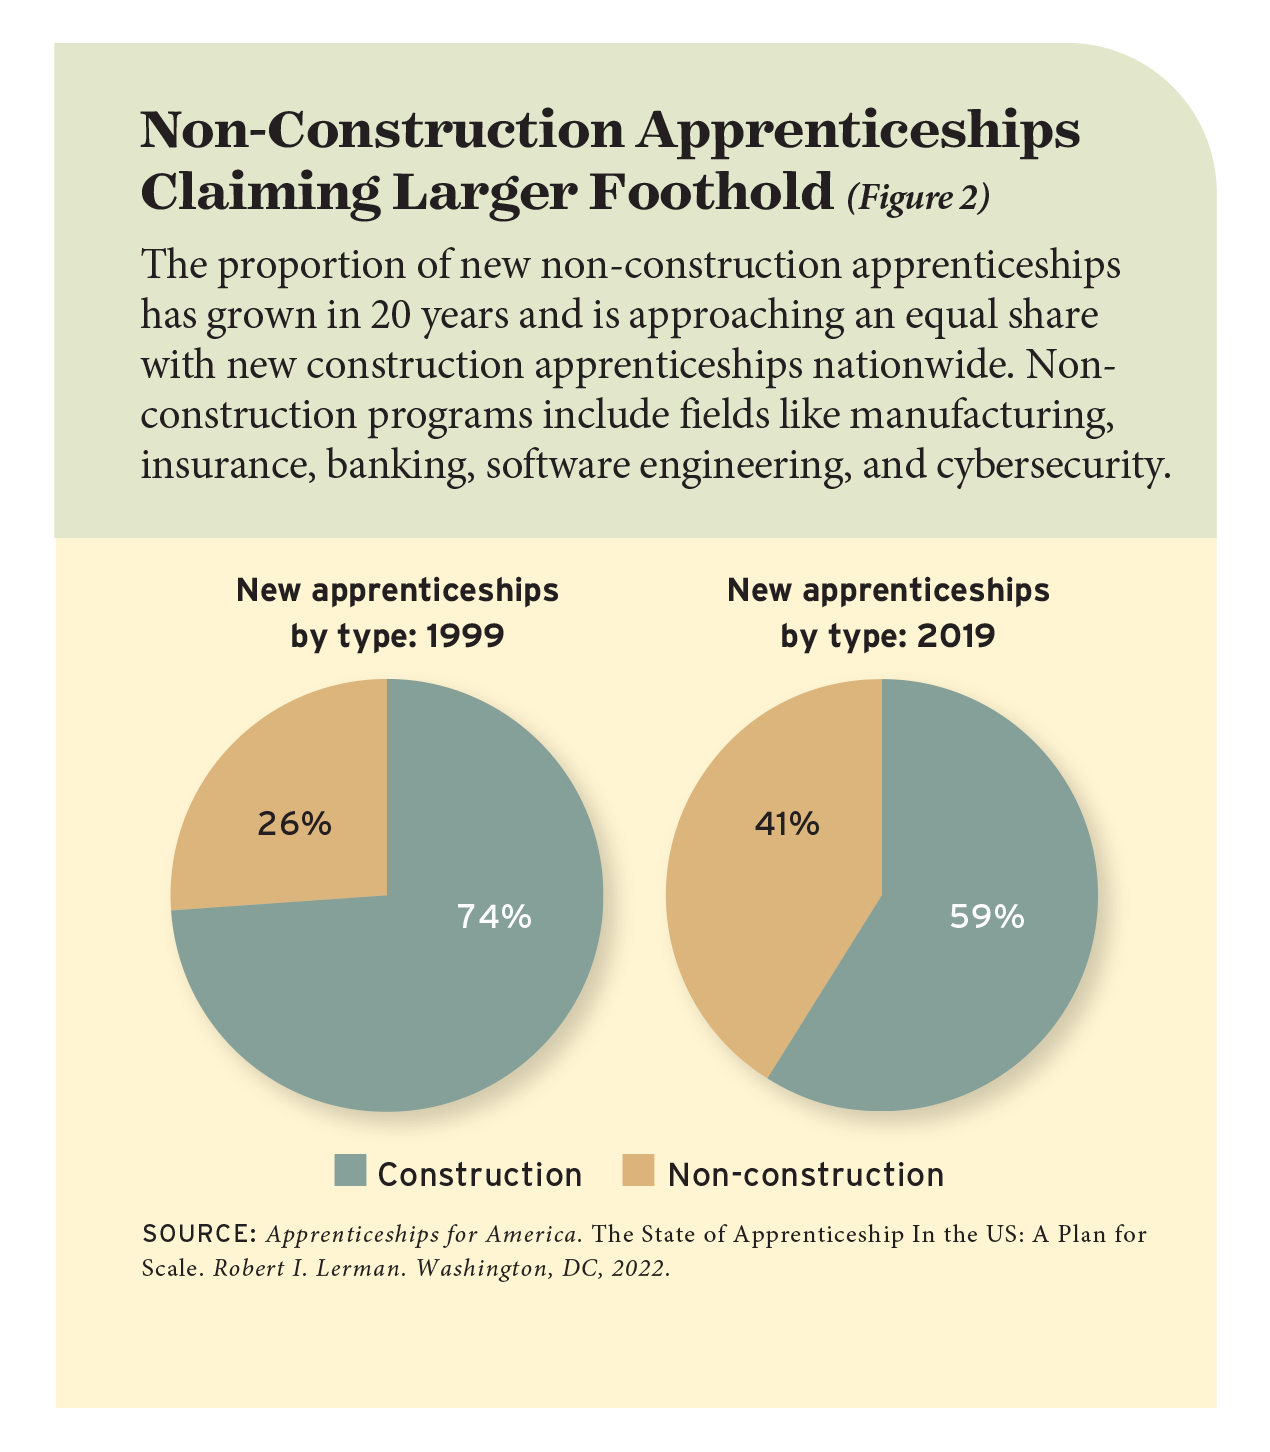 Non-Construction Apprenticeships Claiming Larger Foothold (Figure 2)